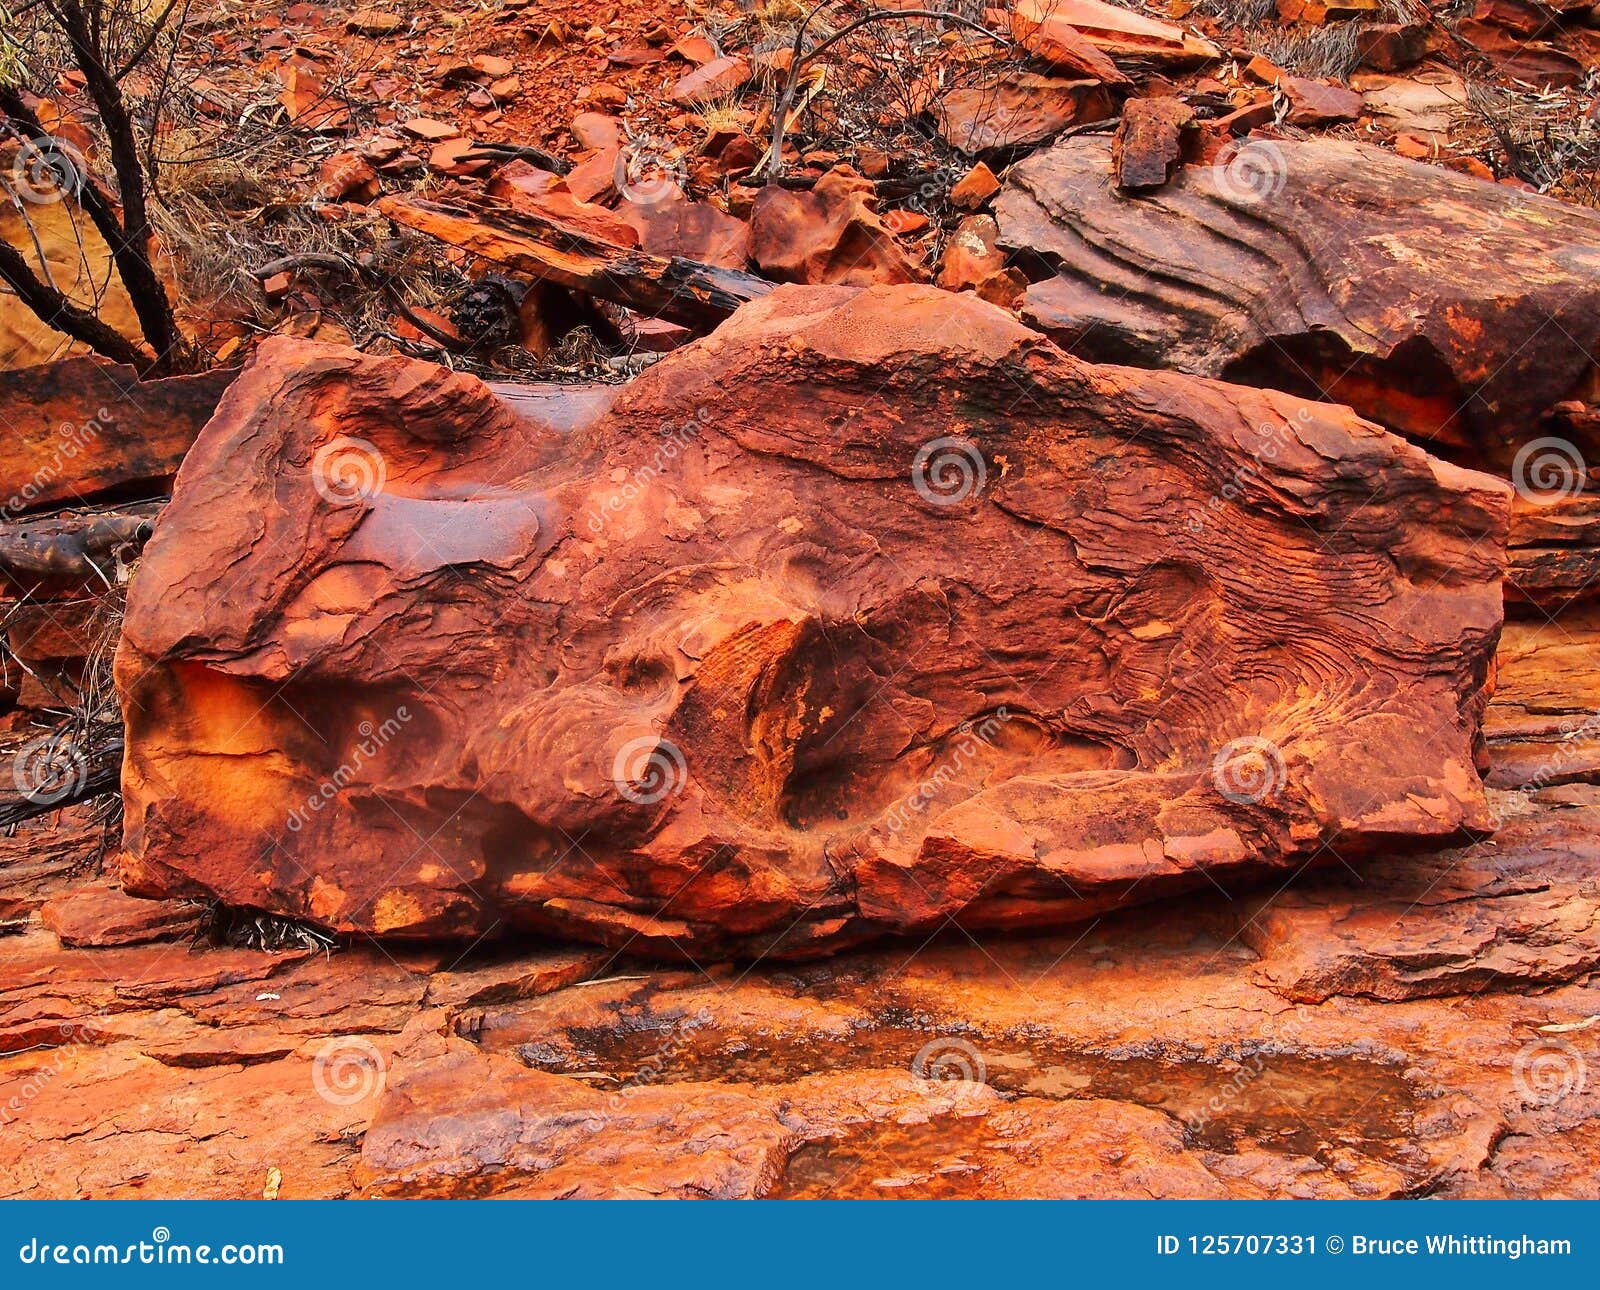 salat Tårer apotek Worn and Eroded Red Rocks, Kings Canyon, Red Centre, Australia Stock Image  - Image of iron, territory: 125707331